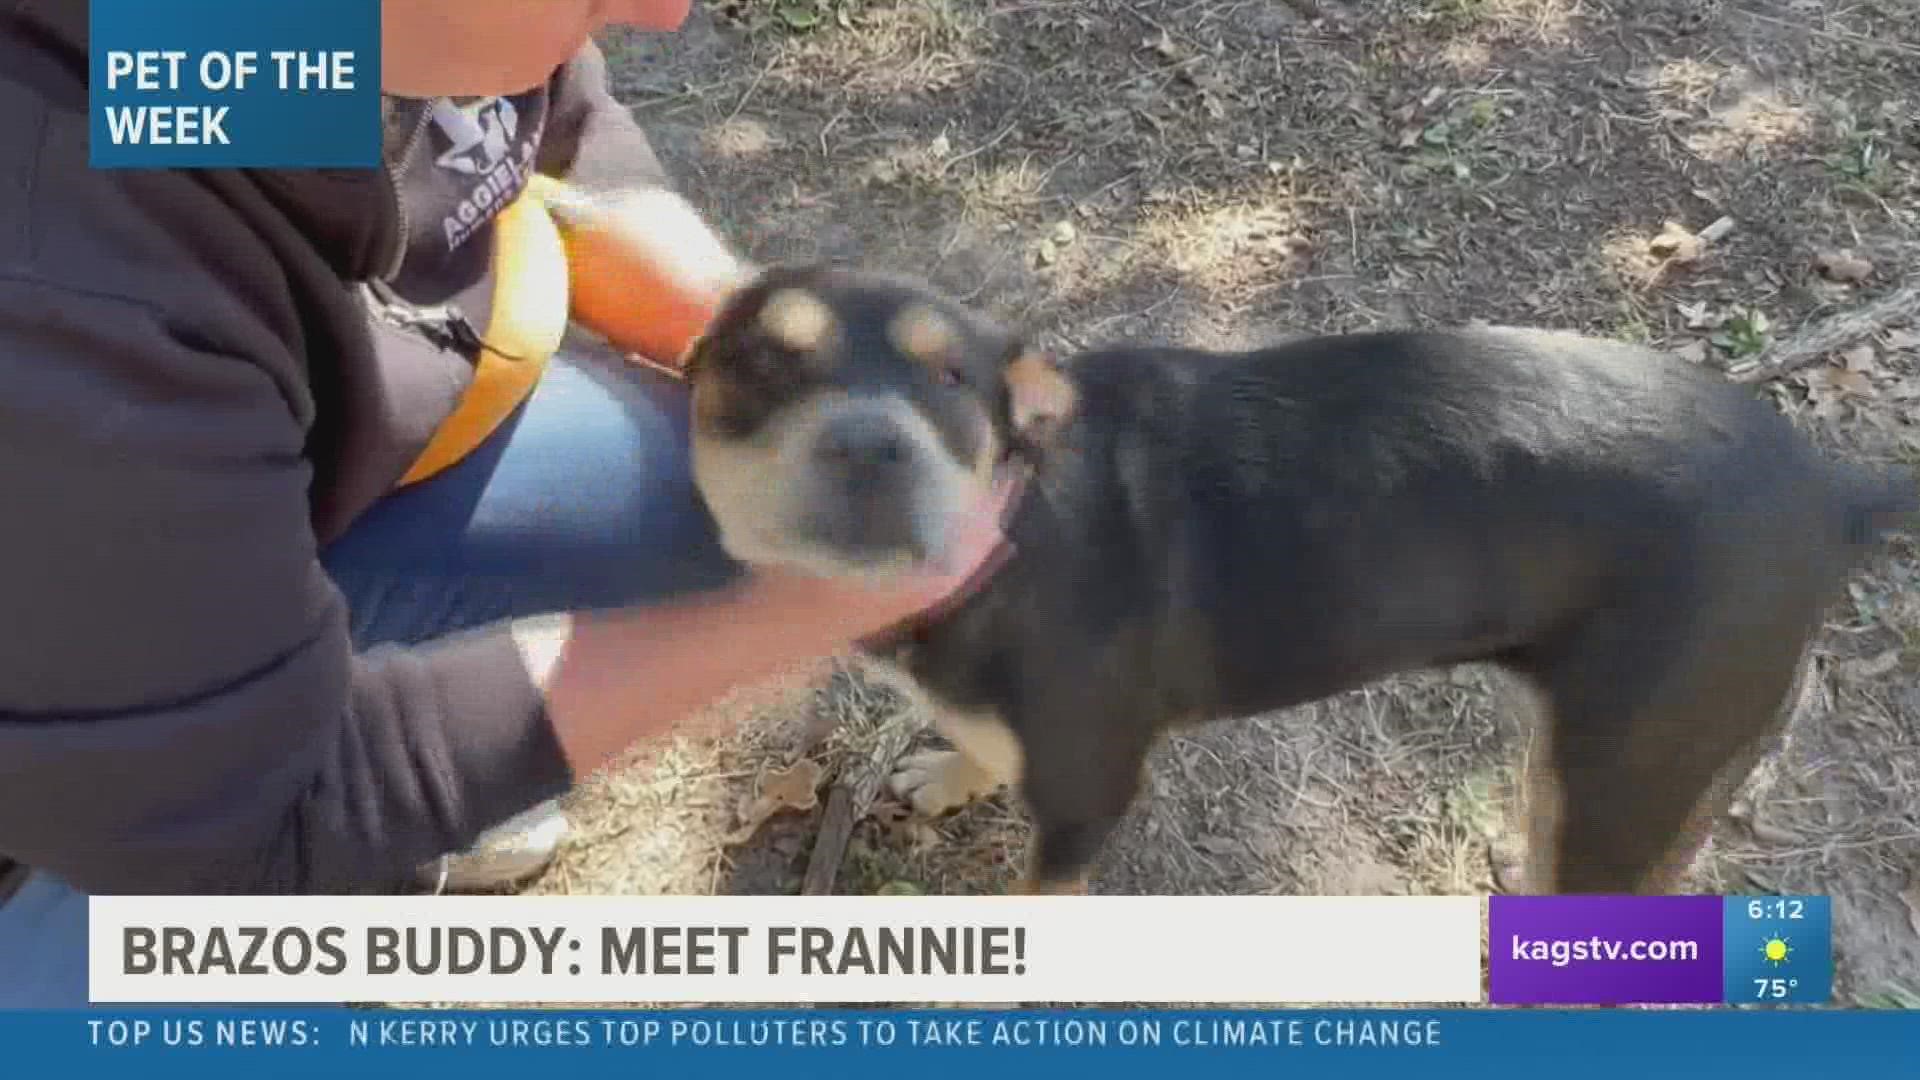 This week's featured Brazos Buddy is Frannie, a one-year-old Shepherd mix that's looking for her forever home.